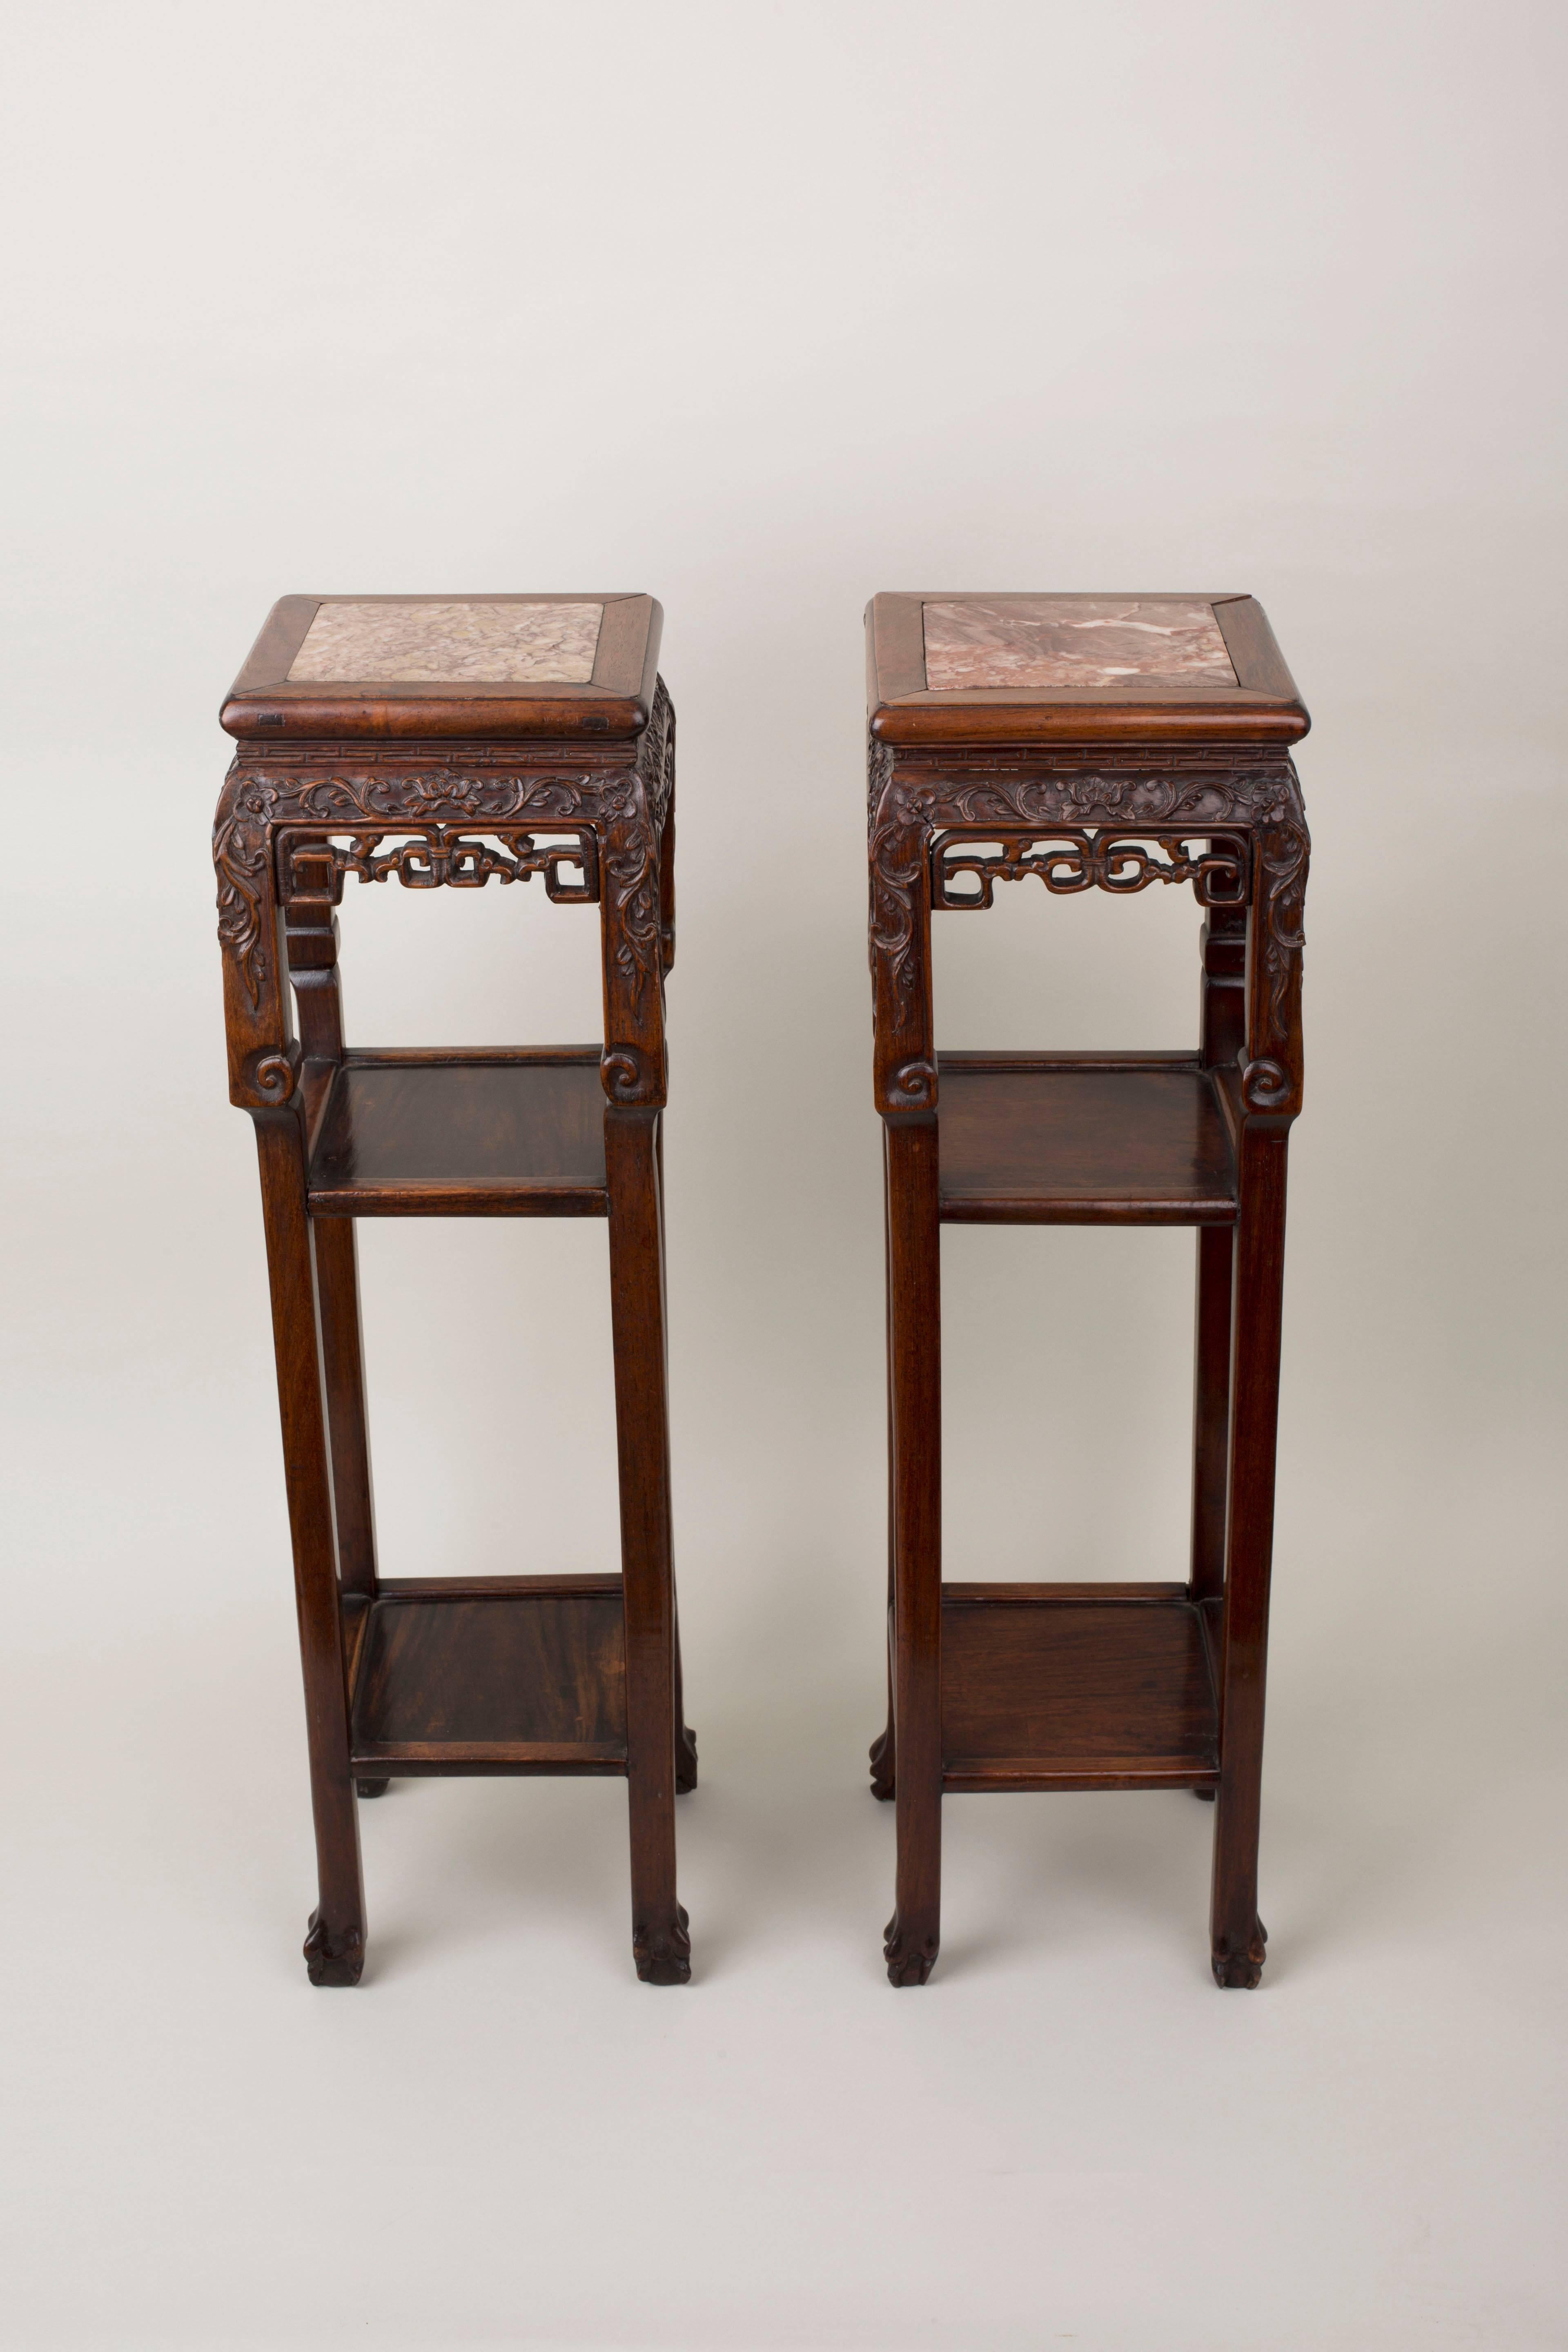 Qing Pair of Chinese Black Wood Hong Mu Square Pedestal Tables, 19th Century For Sale